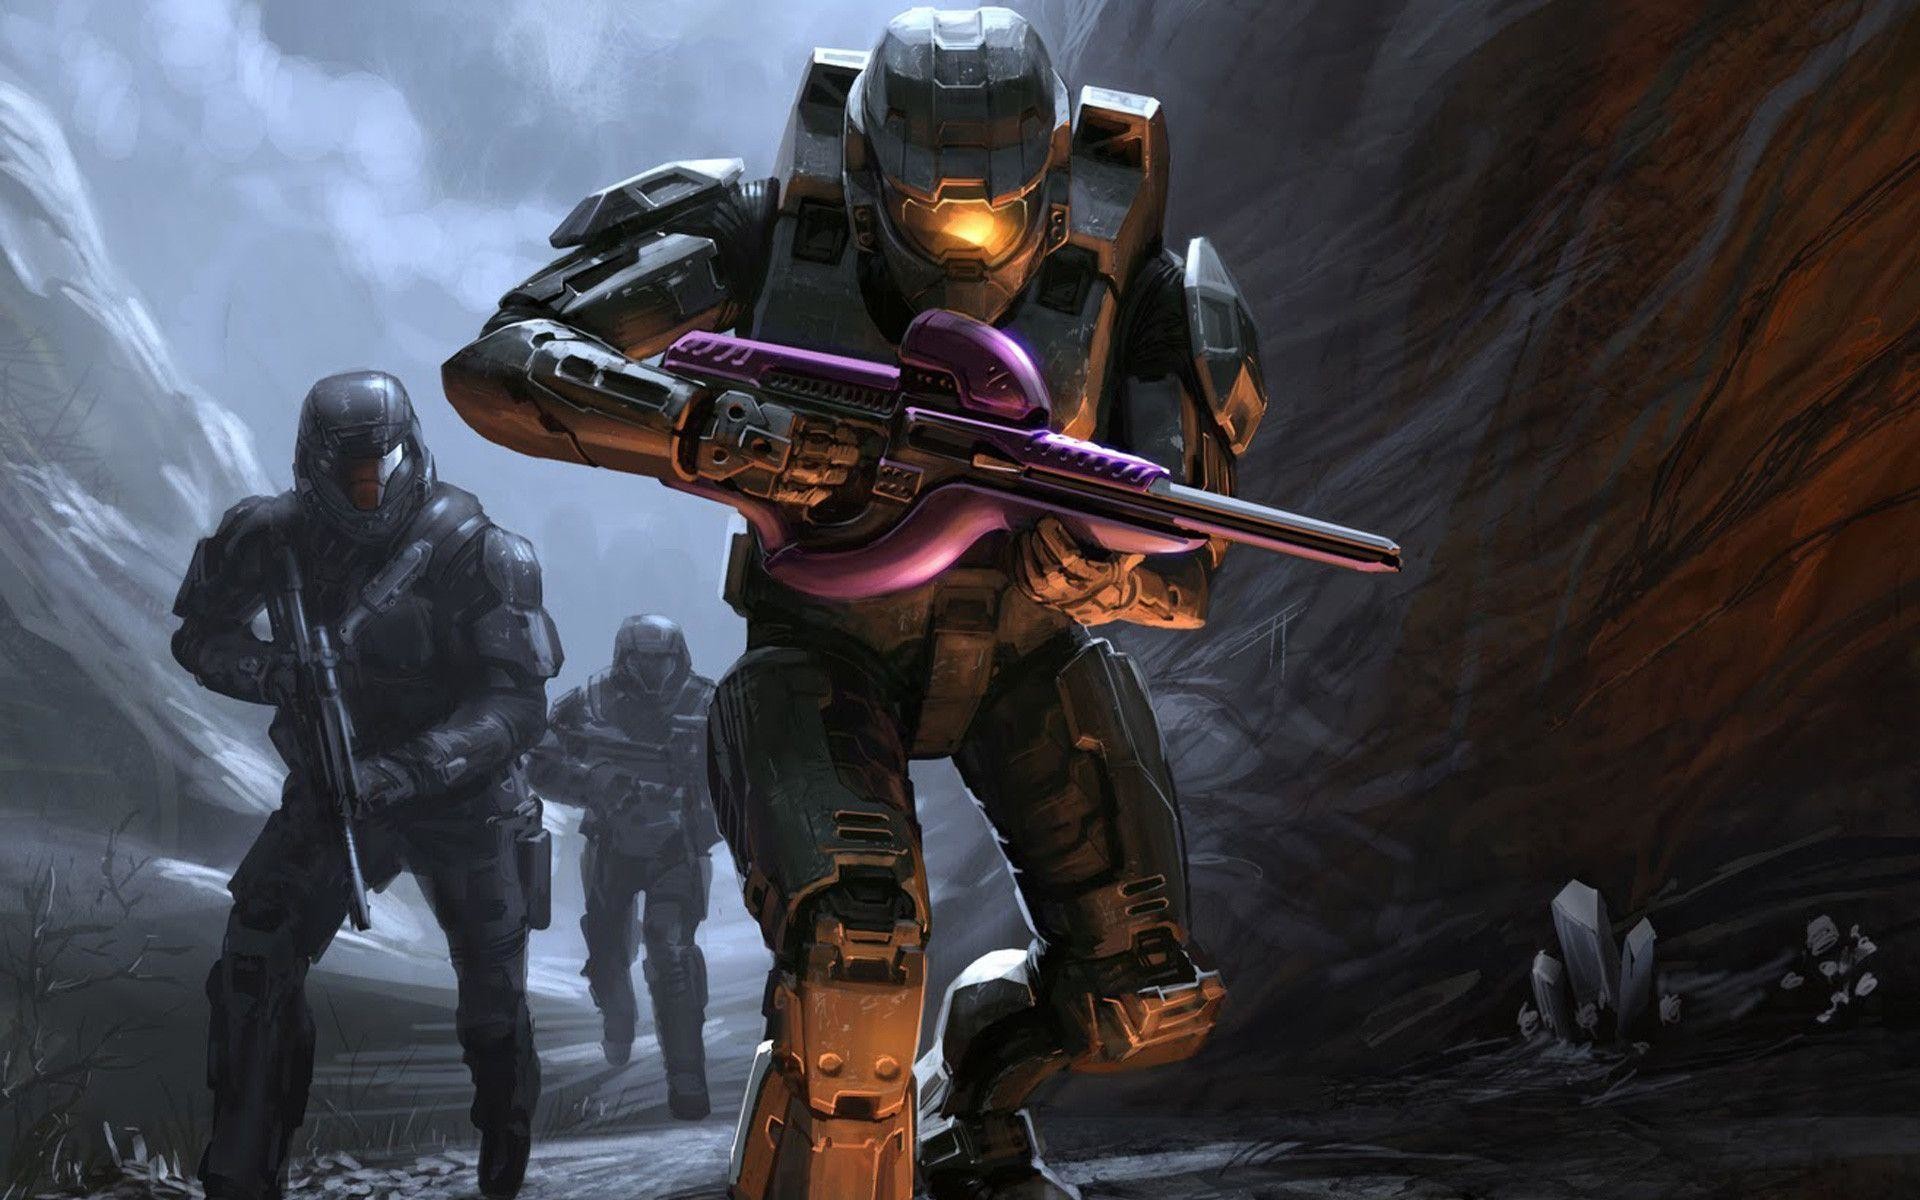 1920x1200 Wallpapers For > Halo 3 Wallpaper Master Chief And Arbiter